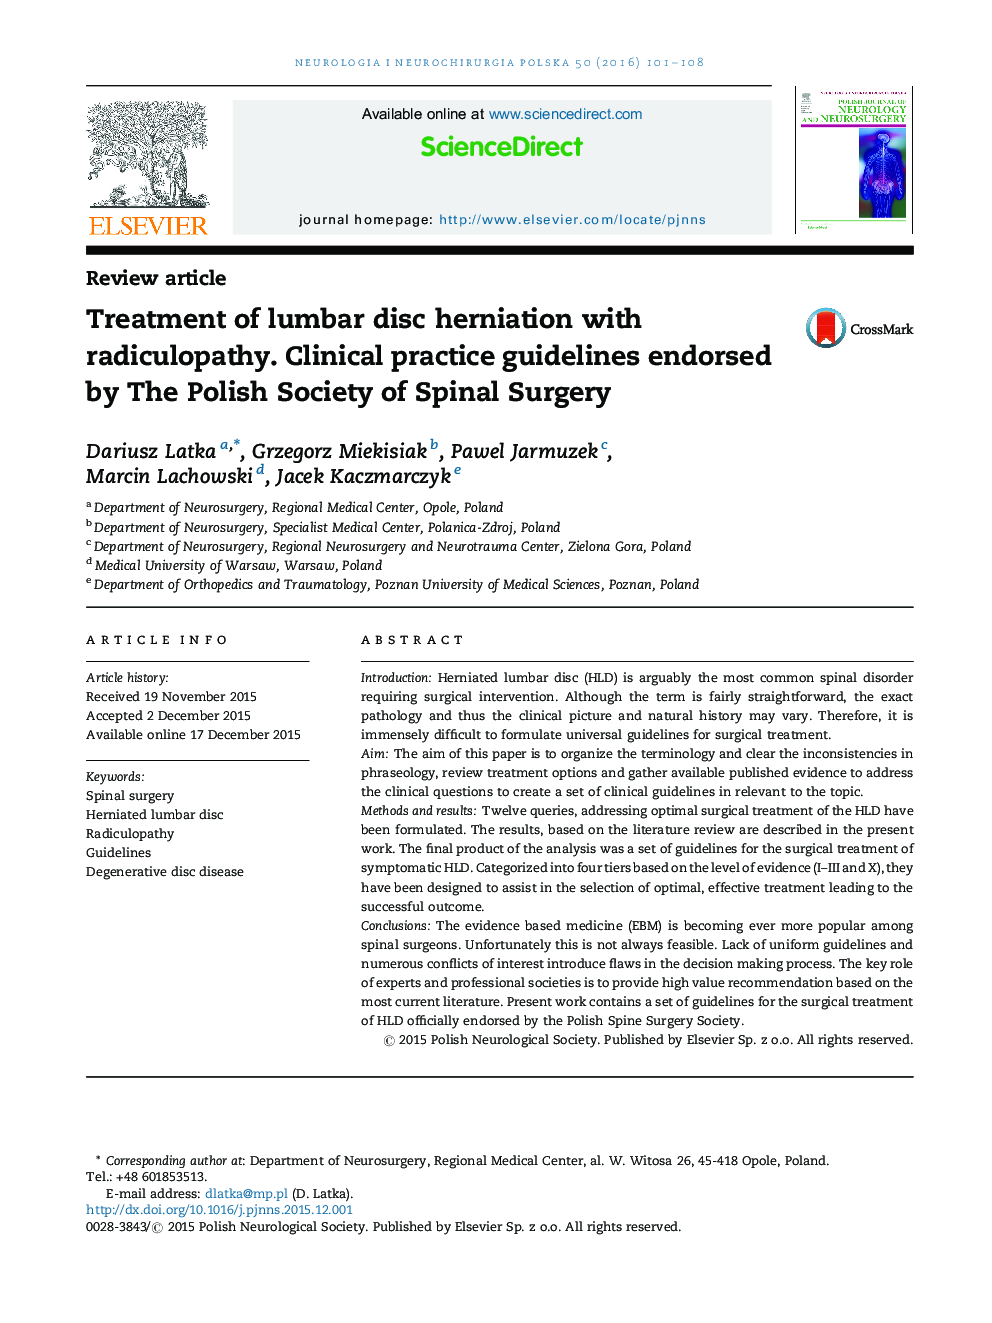 Treatment of lumbar disc herniation with radiculopathy. Clinical practice guidelines endorsed by The Polish Society of Spinal Surgery